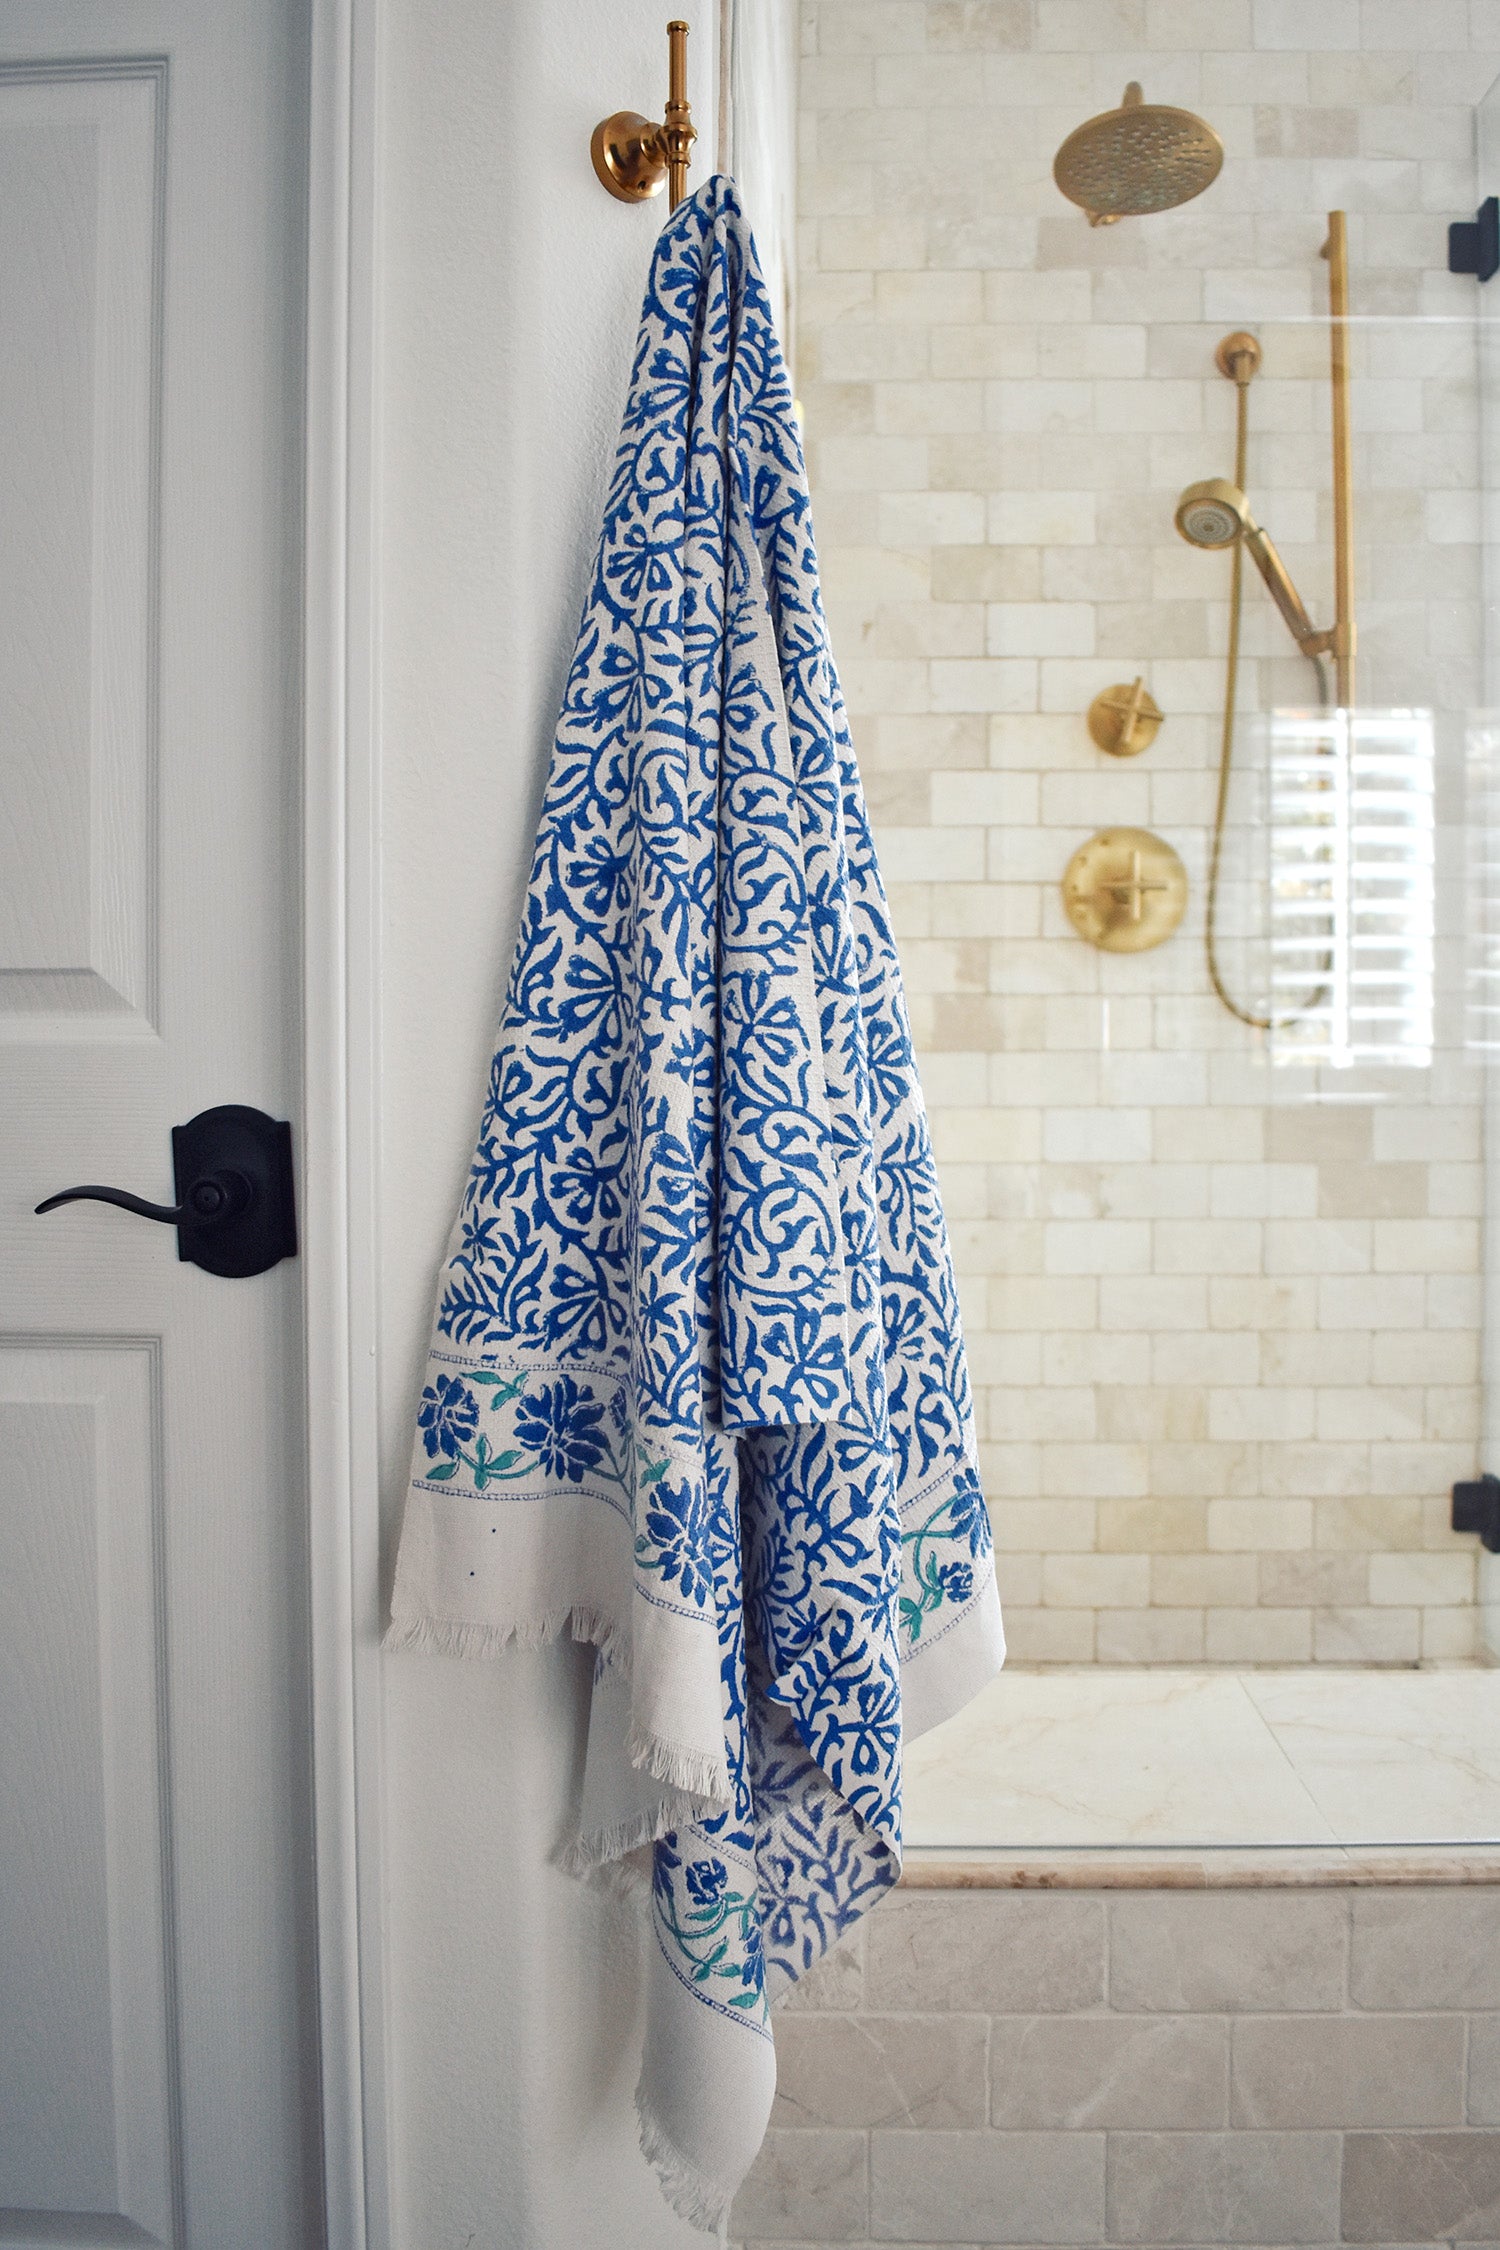 Block printed Athena bath towel hanging on a hook in front of a shower